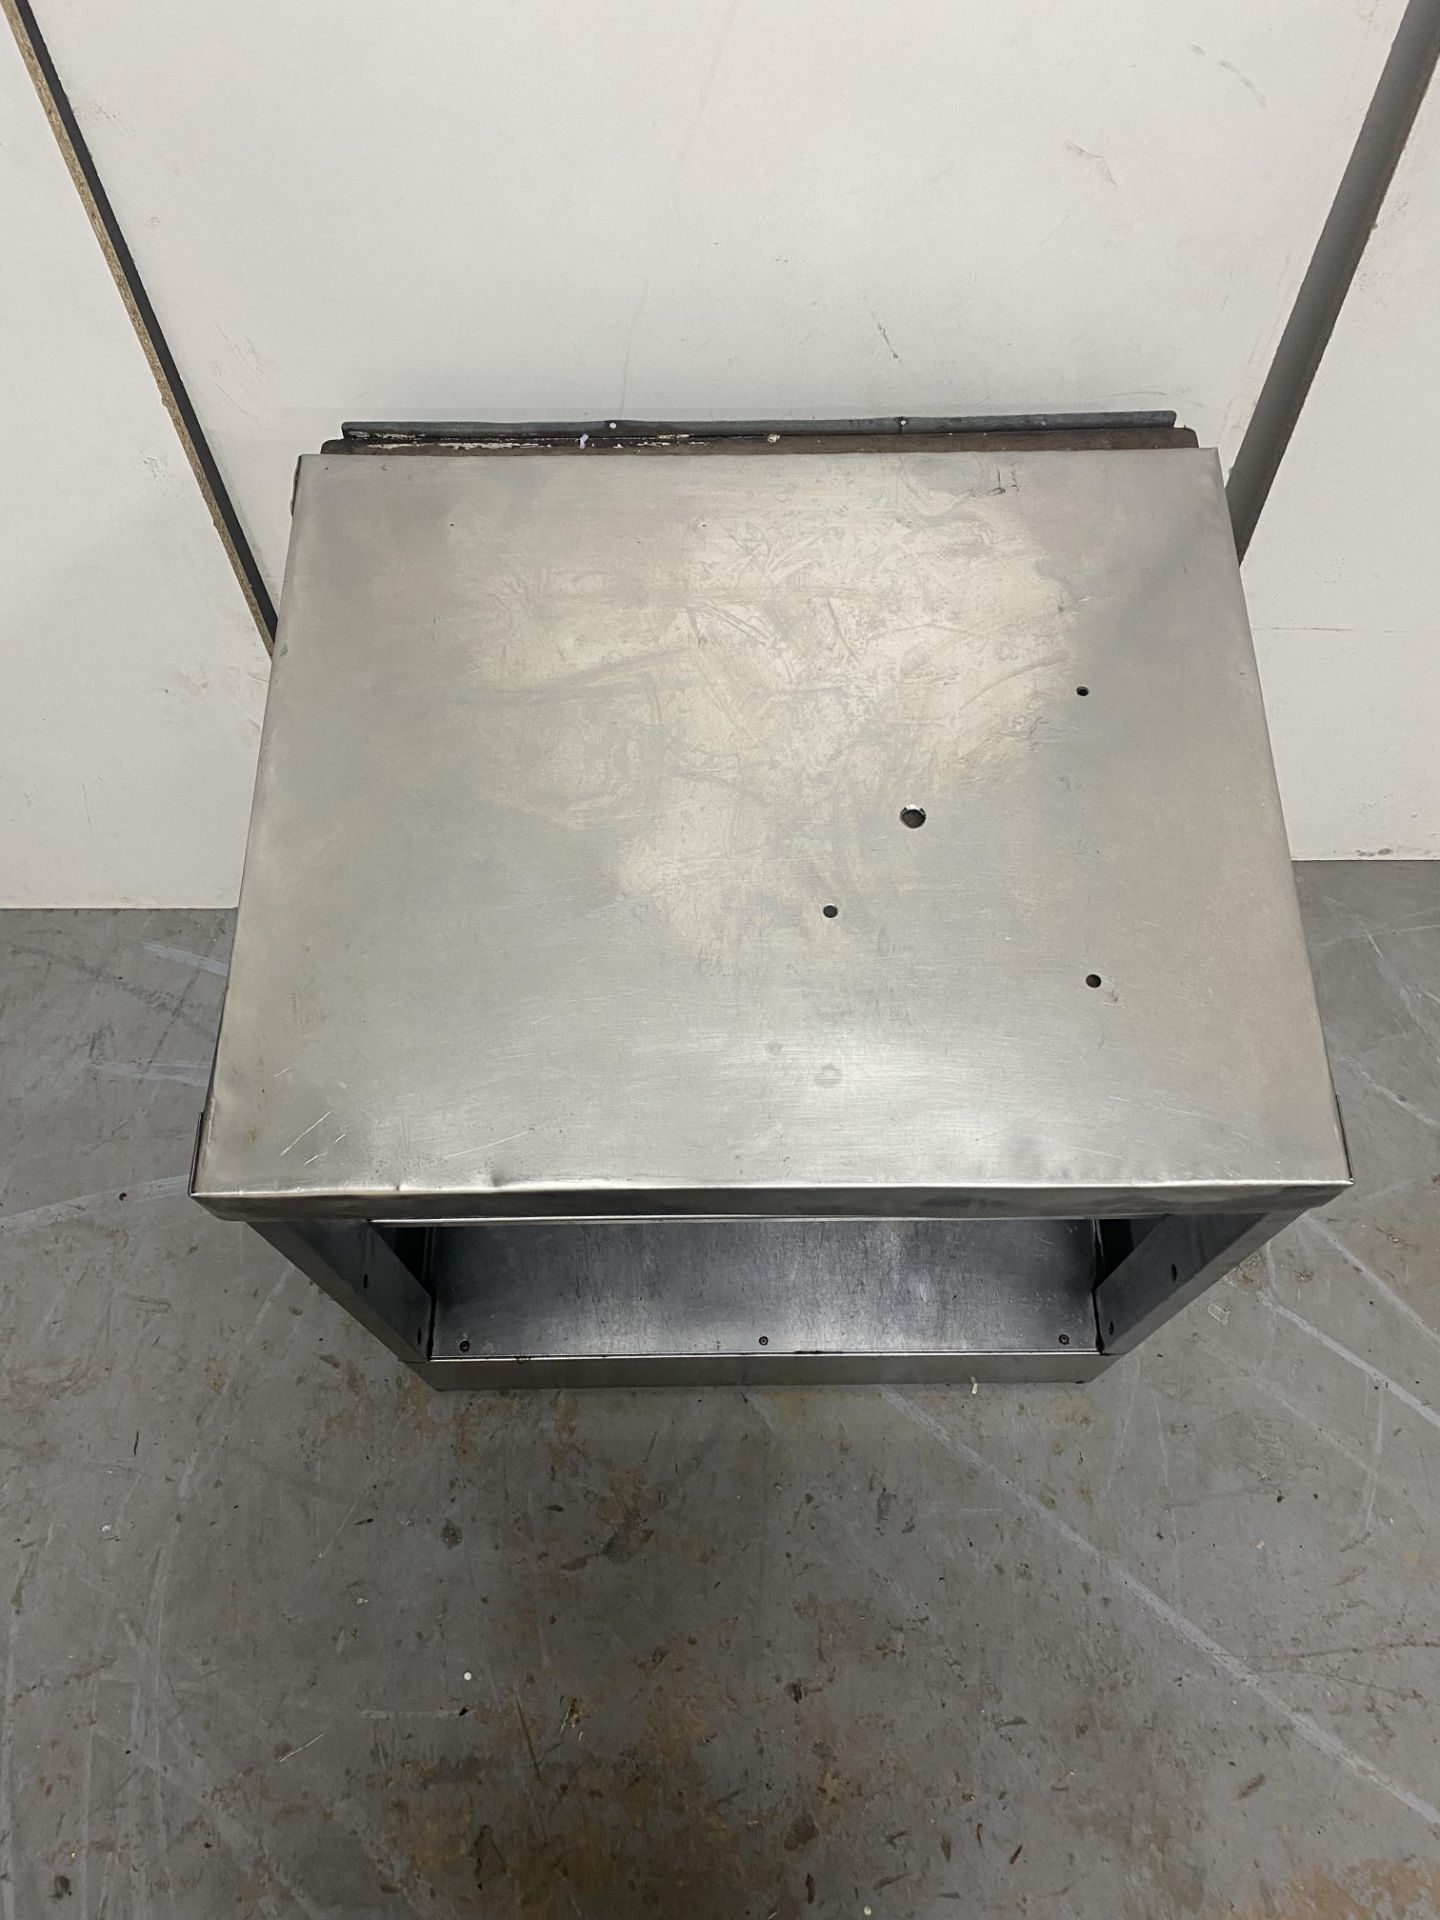 2 Tier Stainless Steel Catering Preperation Shelving Unit - Image 3 of 6